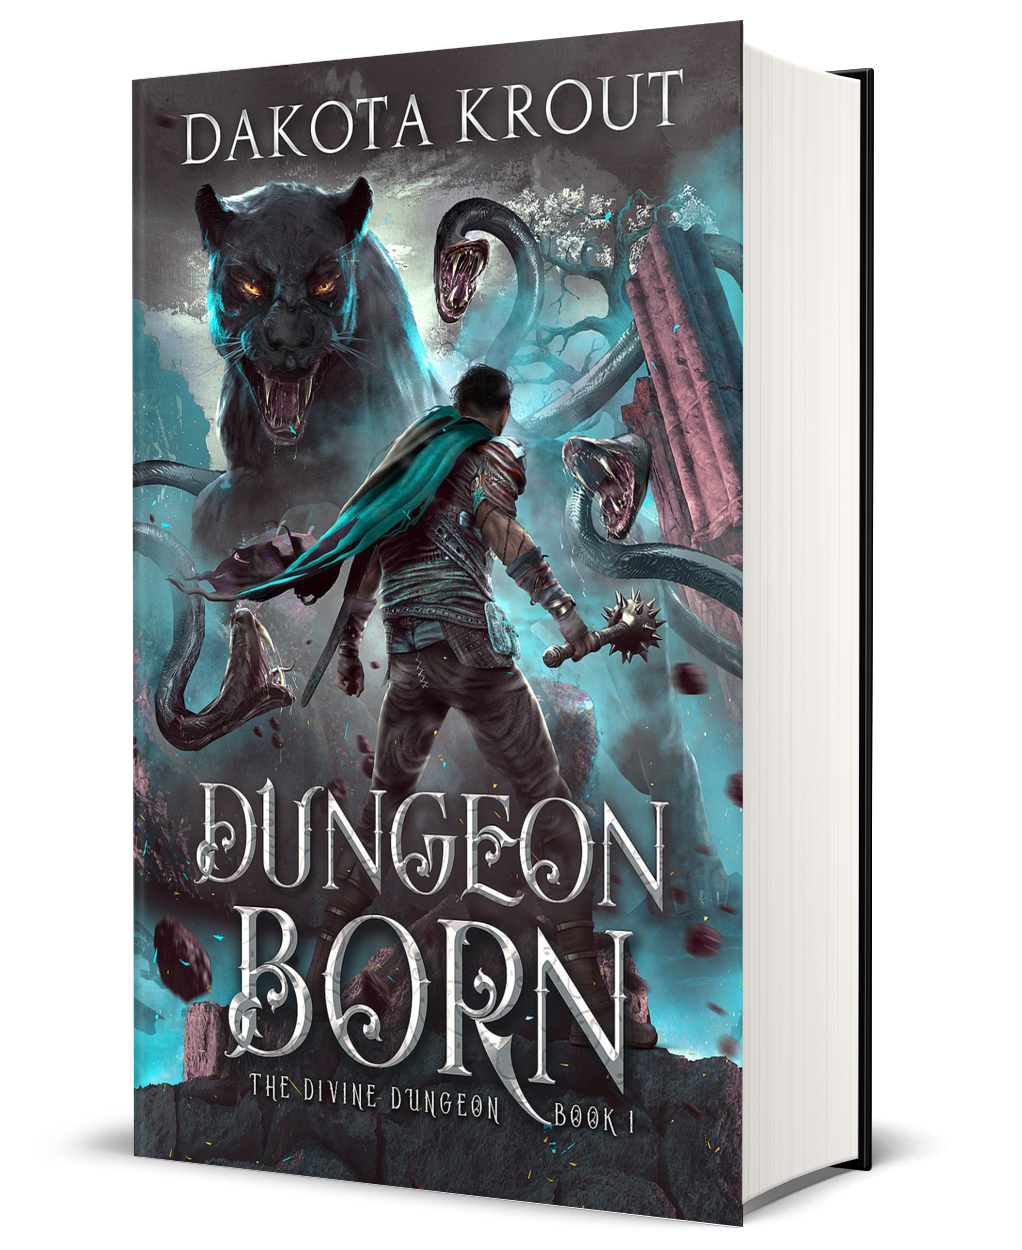 Dungeon Born Signed Hardcover